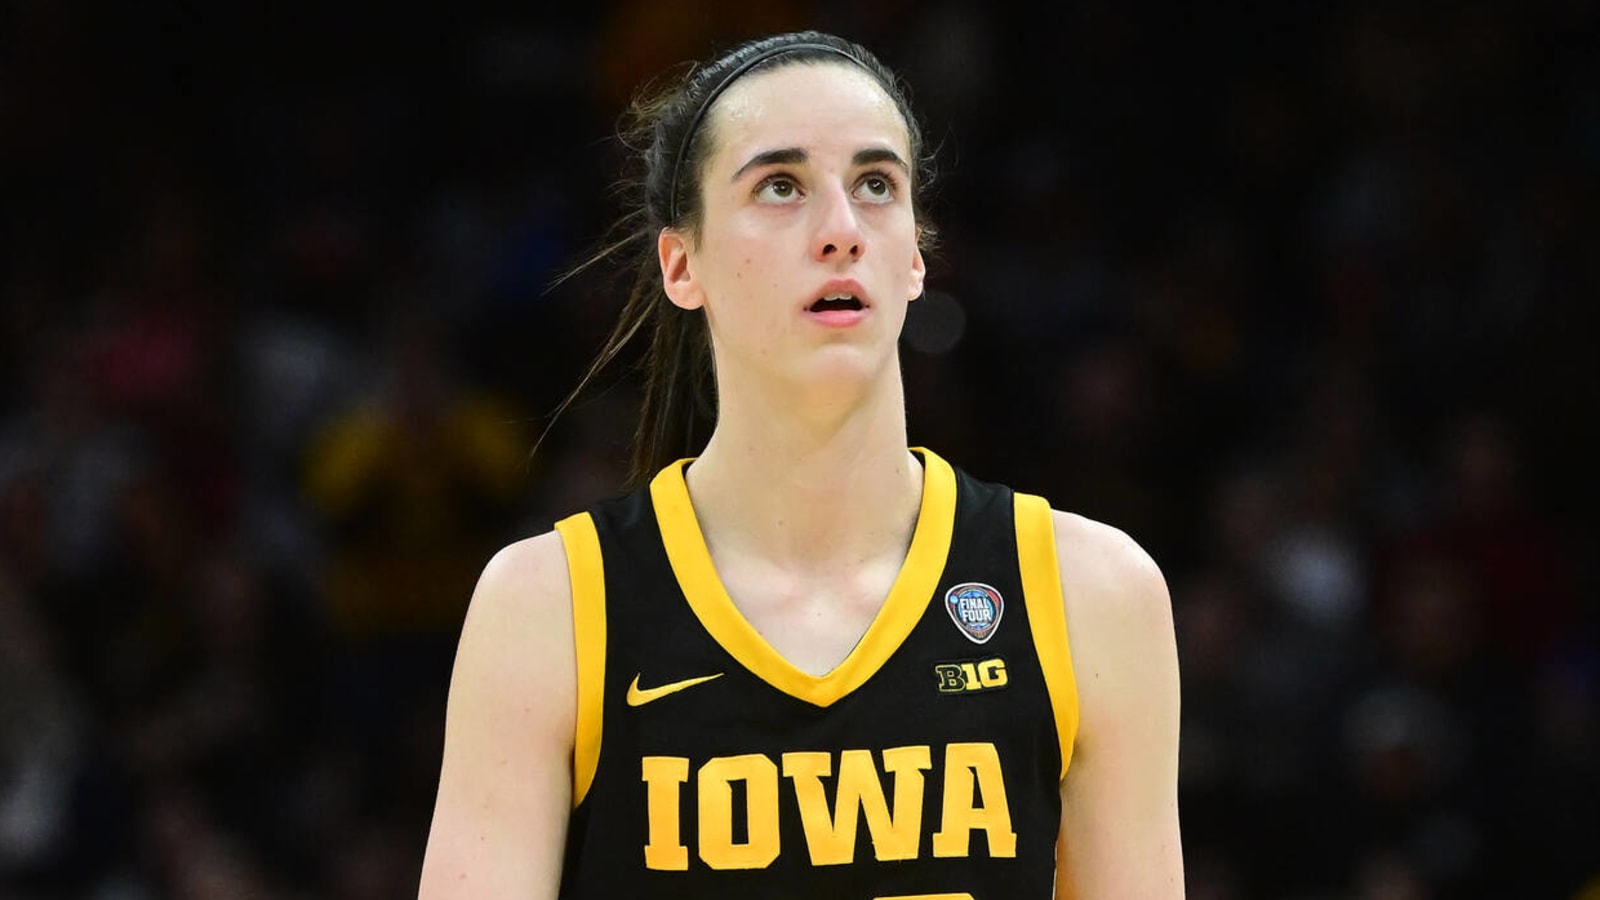 Caitlin Clark touted as ‘most influential player of all-time’ by Skip Bayless’ co-host after NCAA tournament